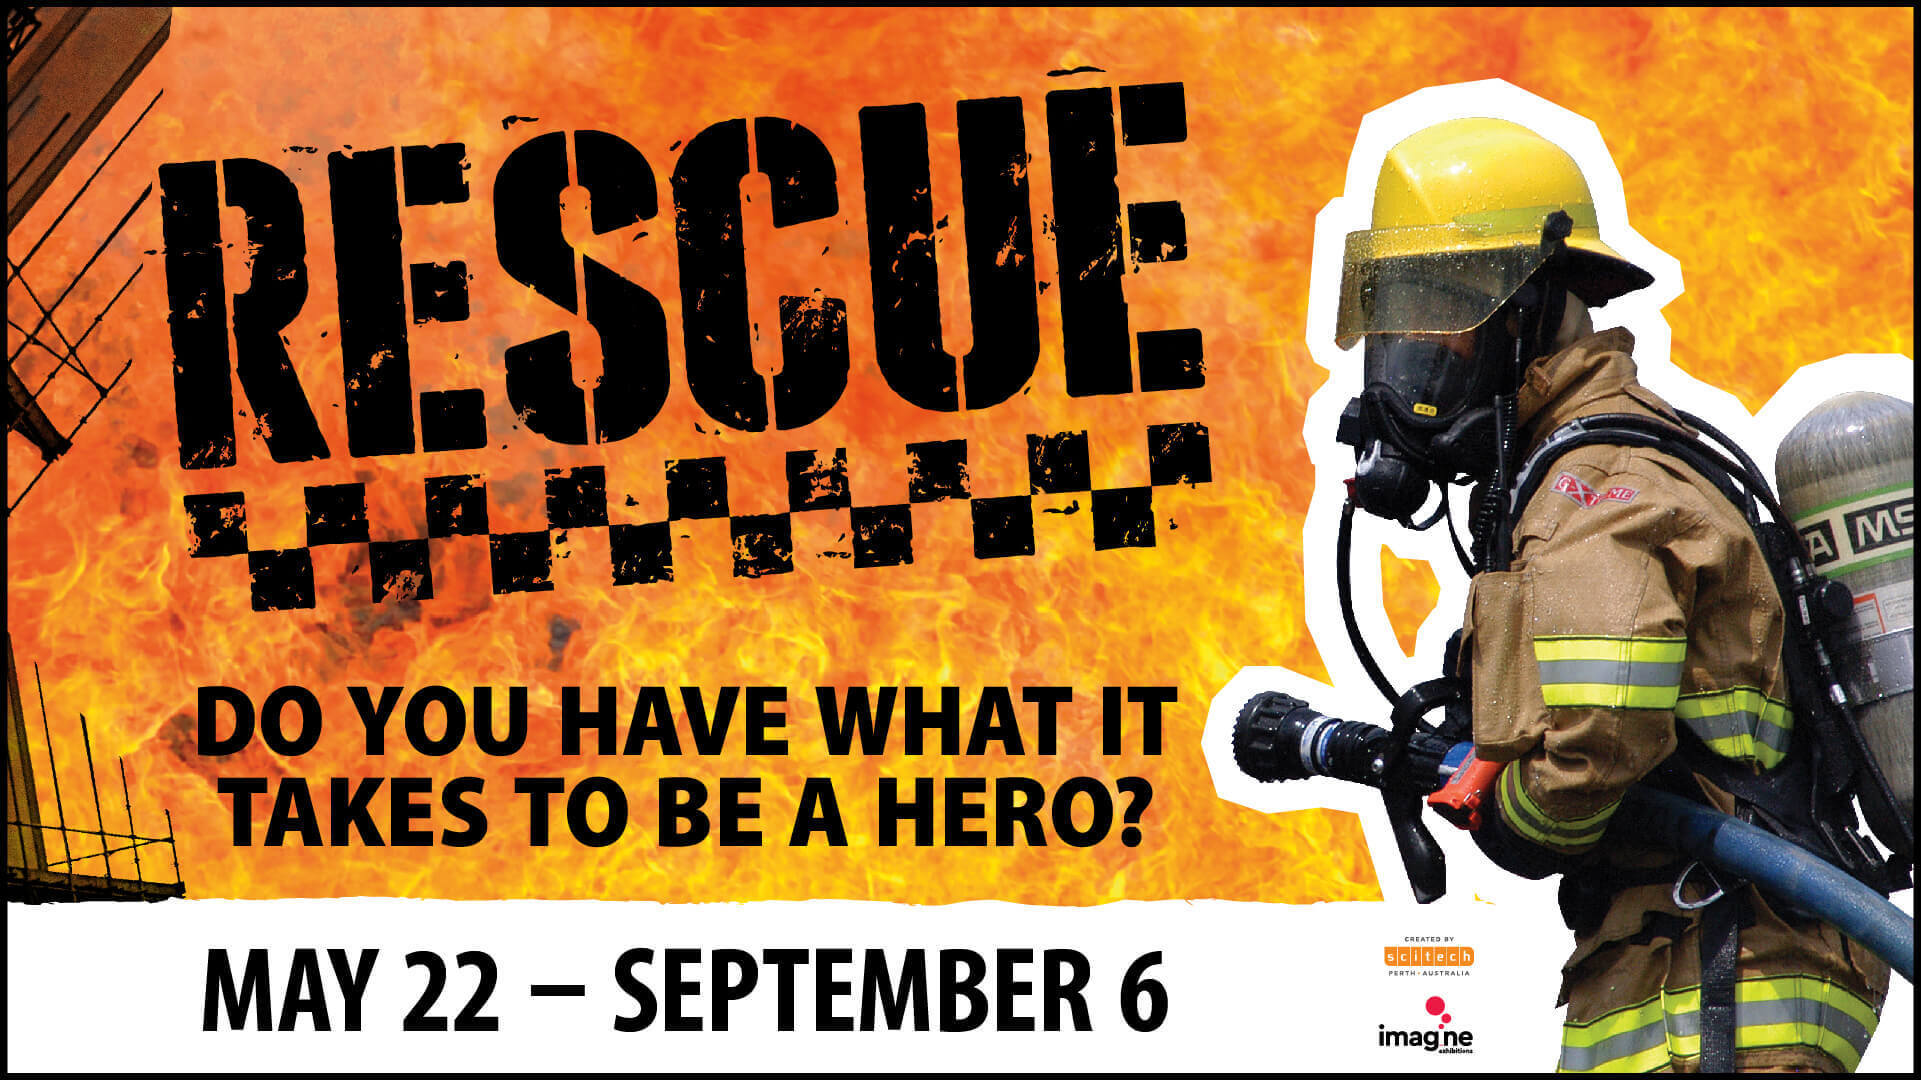 RESCUE - Do you have what it takes to be a hero? May 22 - September 6